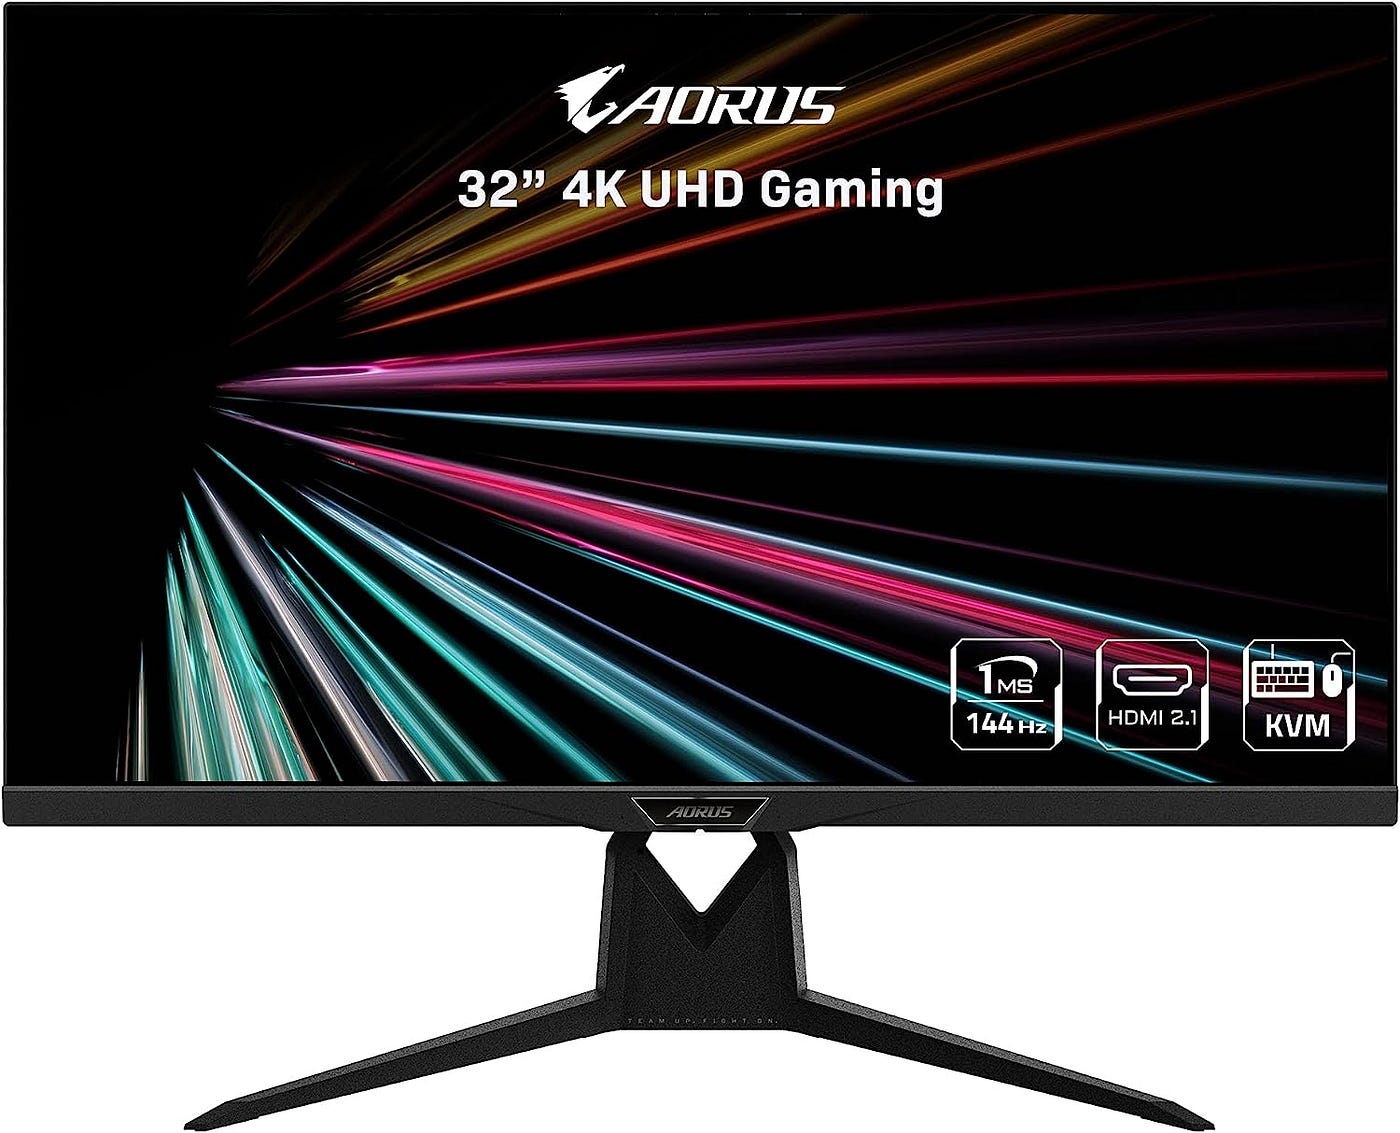 Top 5 Gaming Monitors For The PS5 - 5 BEST Gaming Monitors For PS5 